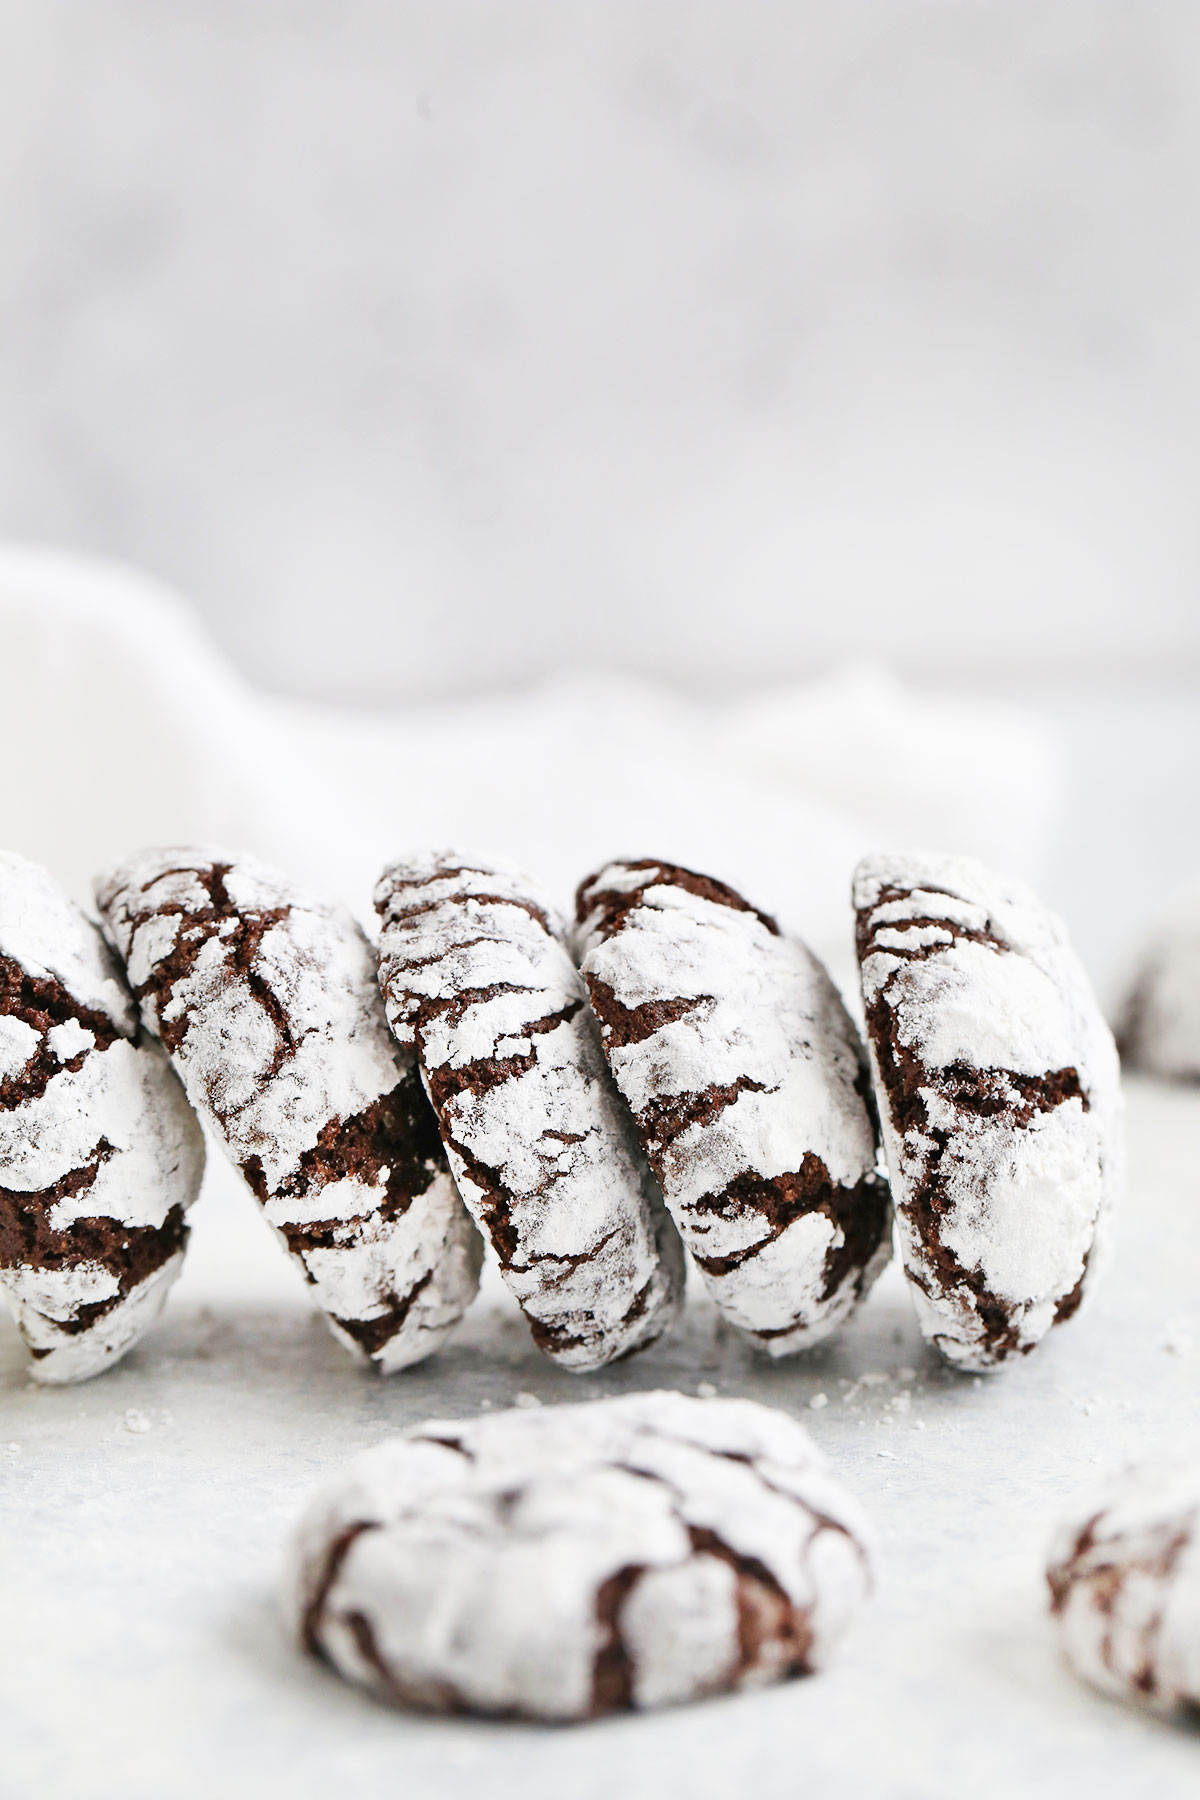 Front view of gluten-free chocolate crinkle cookies in a line